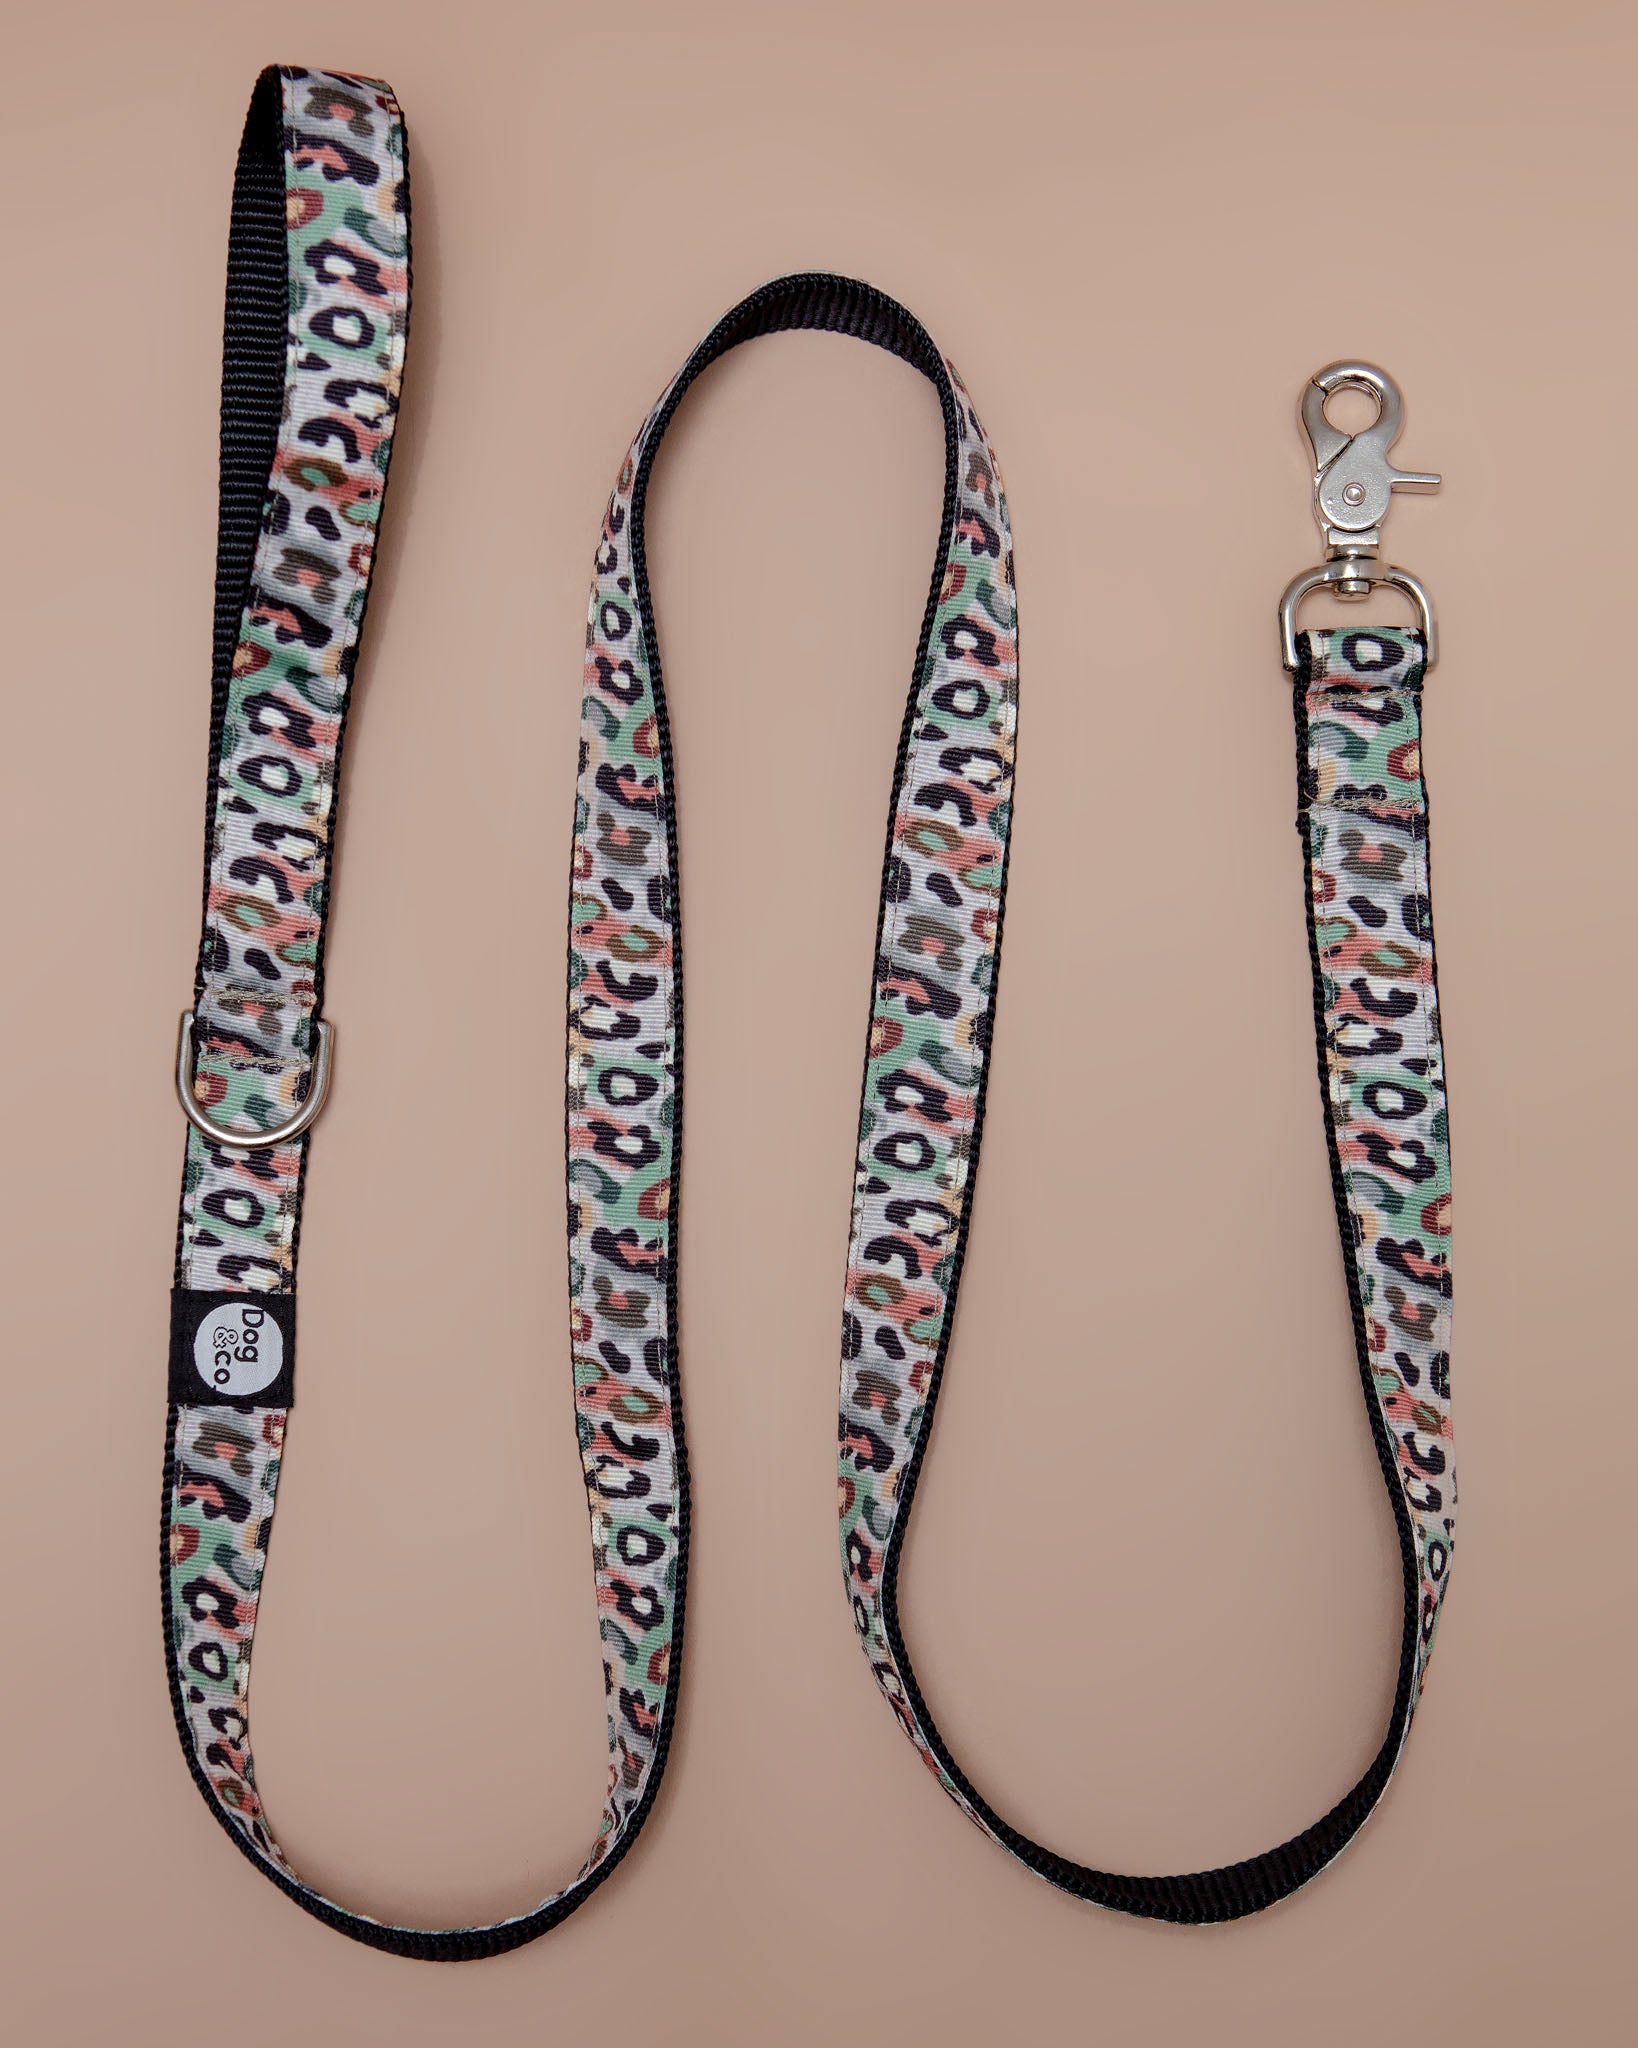 Camo Leopard Dog Leash (Made in NYC)